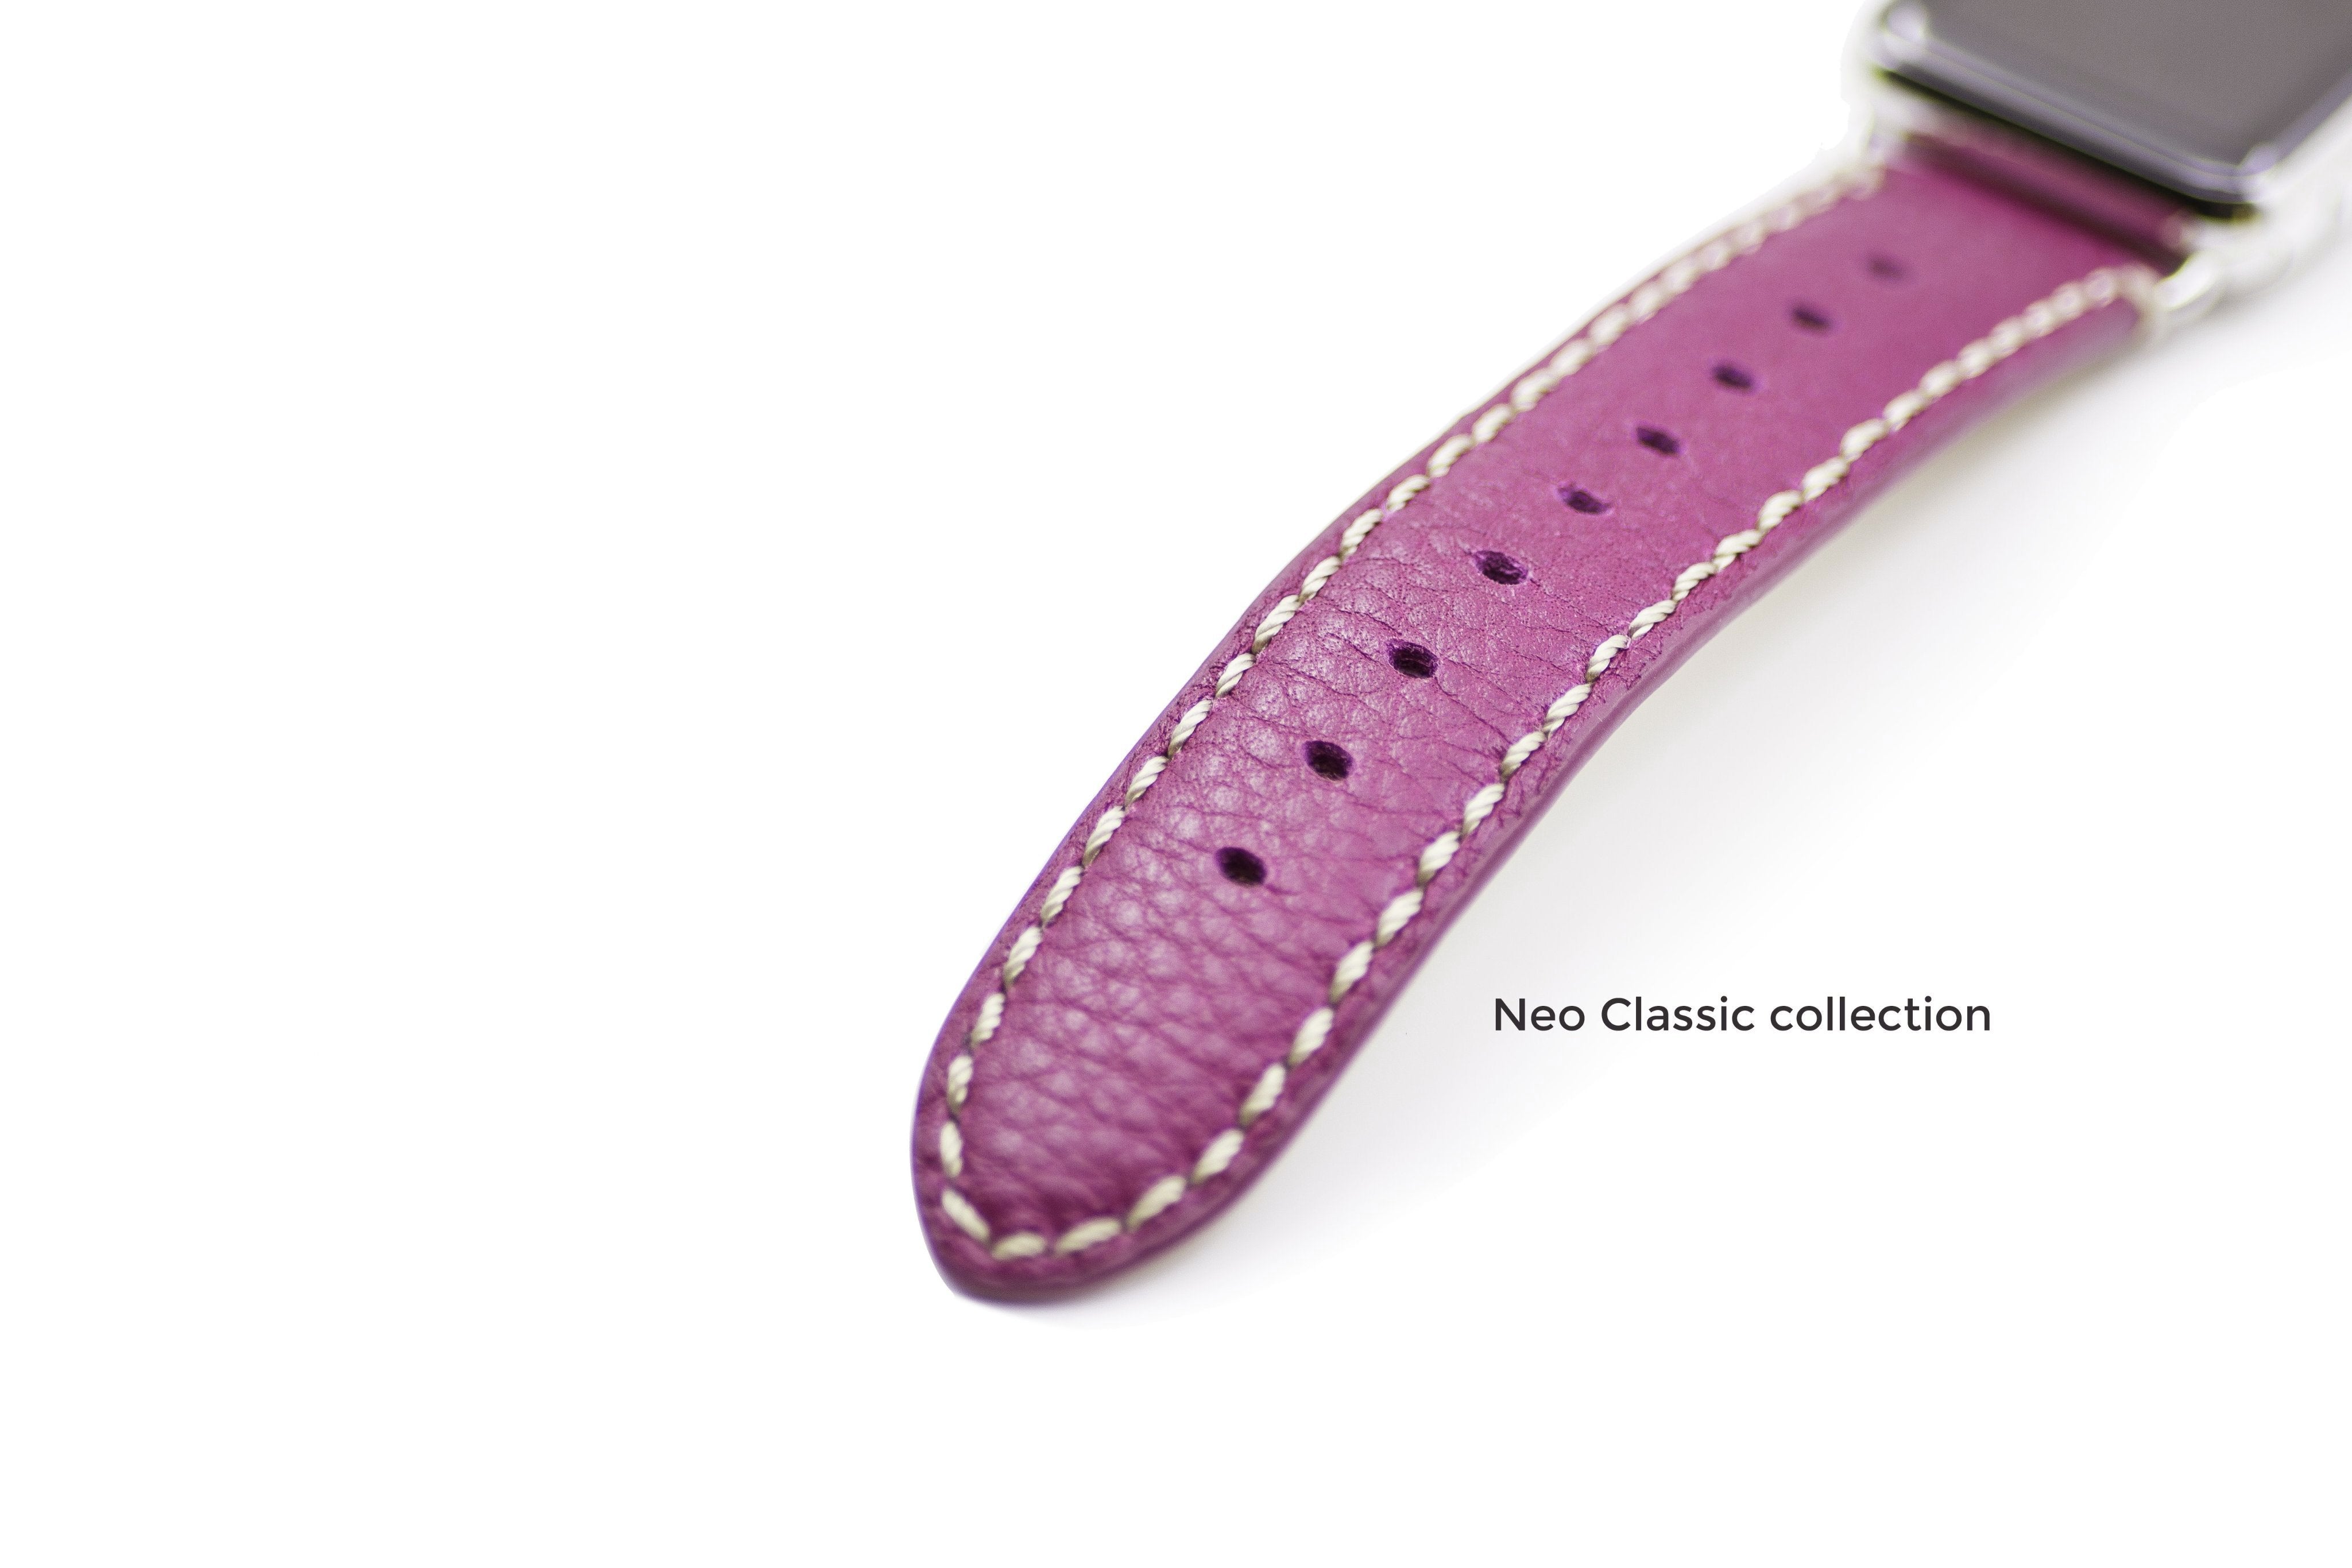 Neo Classic Collection - Handcrafted Leather Apple Watch Band-Watch Band- phone case - phone cases- phone cover- iphone cover- iphone case- iphone cases- leather case- leather cases- DIYCASE - custom case - leather cover - hand strap case - croco pattern case - snake pattern case - carbon fiber phone case - phone case brand - unique phone case - high quality - phone case brand - protective case - buy phone case hong kong - online buy phone case - iphone‎手機殼 - 客製化手機殼 - samsung ‎手機殼 - 香港手機殼 - 買電話殼